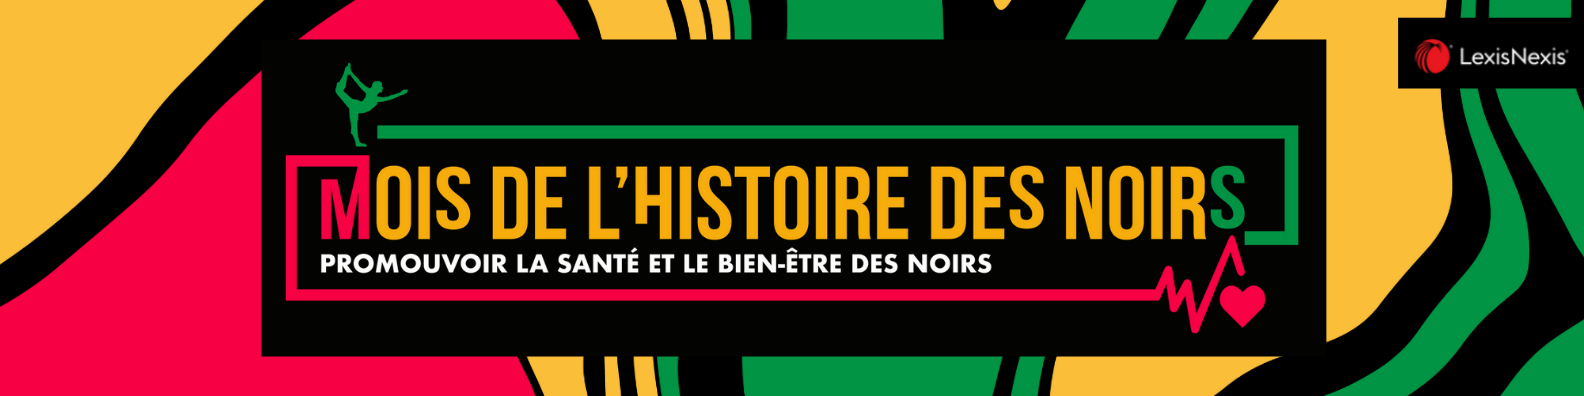 BHM_French_Linkedin_Banner_1585x396_8zppm.png